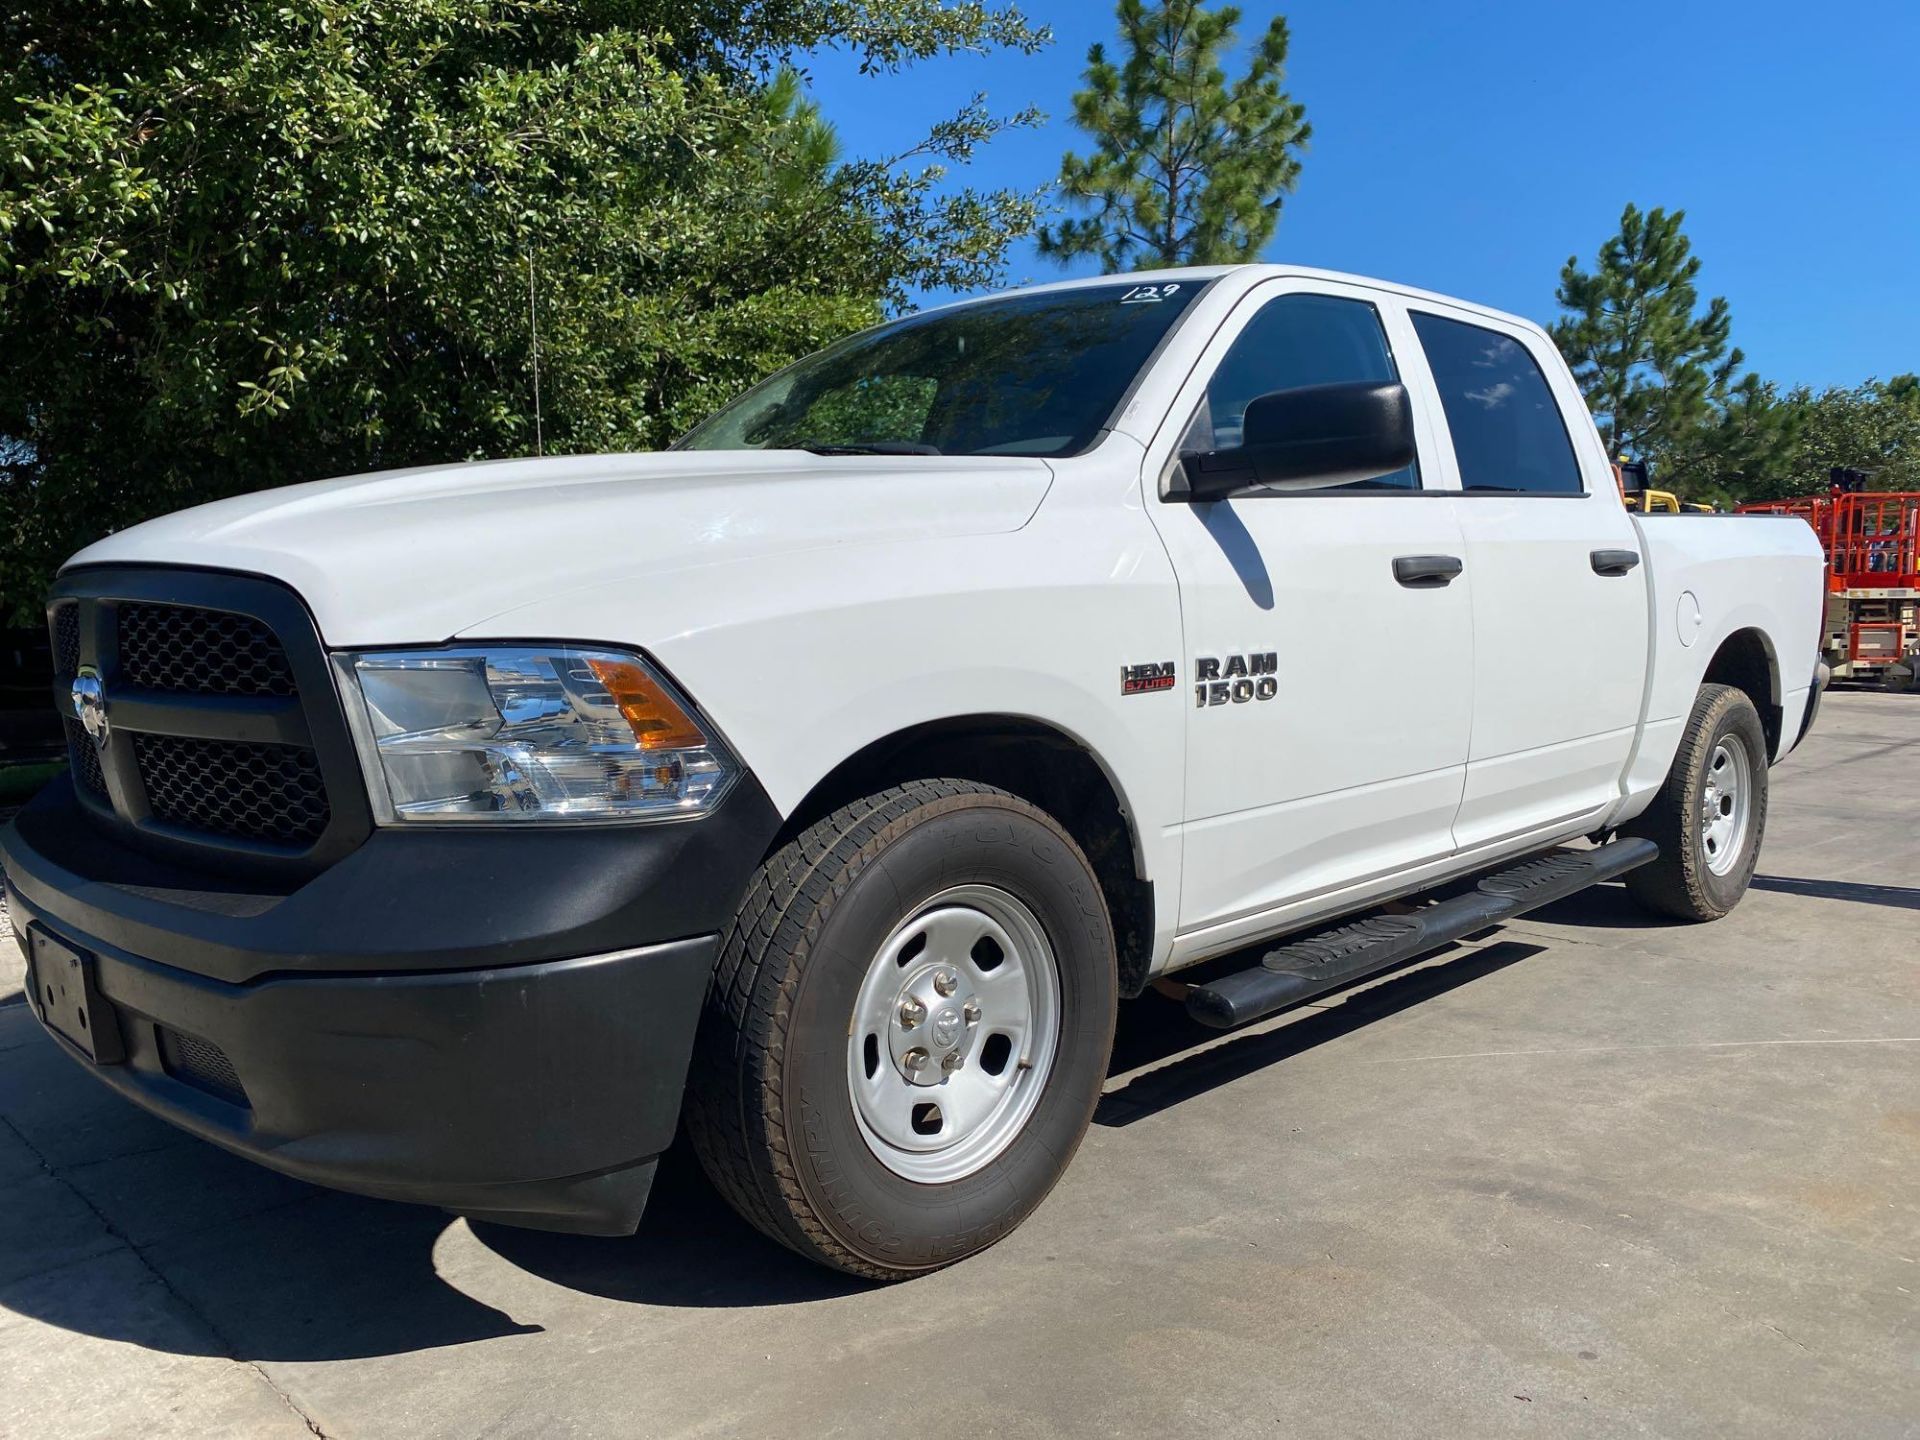 2015 DODGE 1500 HEMI CREW CAB PICK UP TRUCK, LEATHER SEATS, 86,302 MILES SHOWING, ICE COLD AIR, RUNS